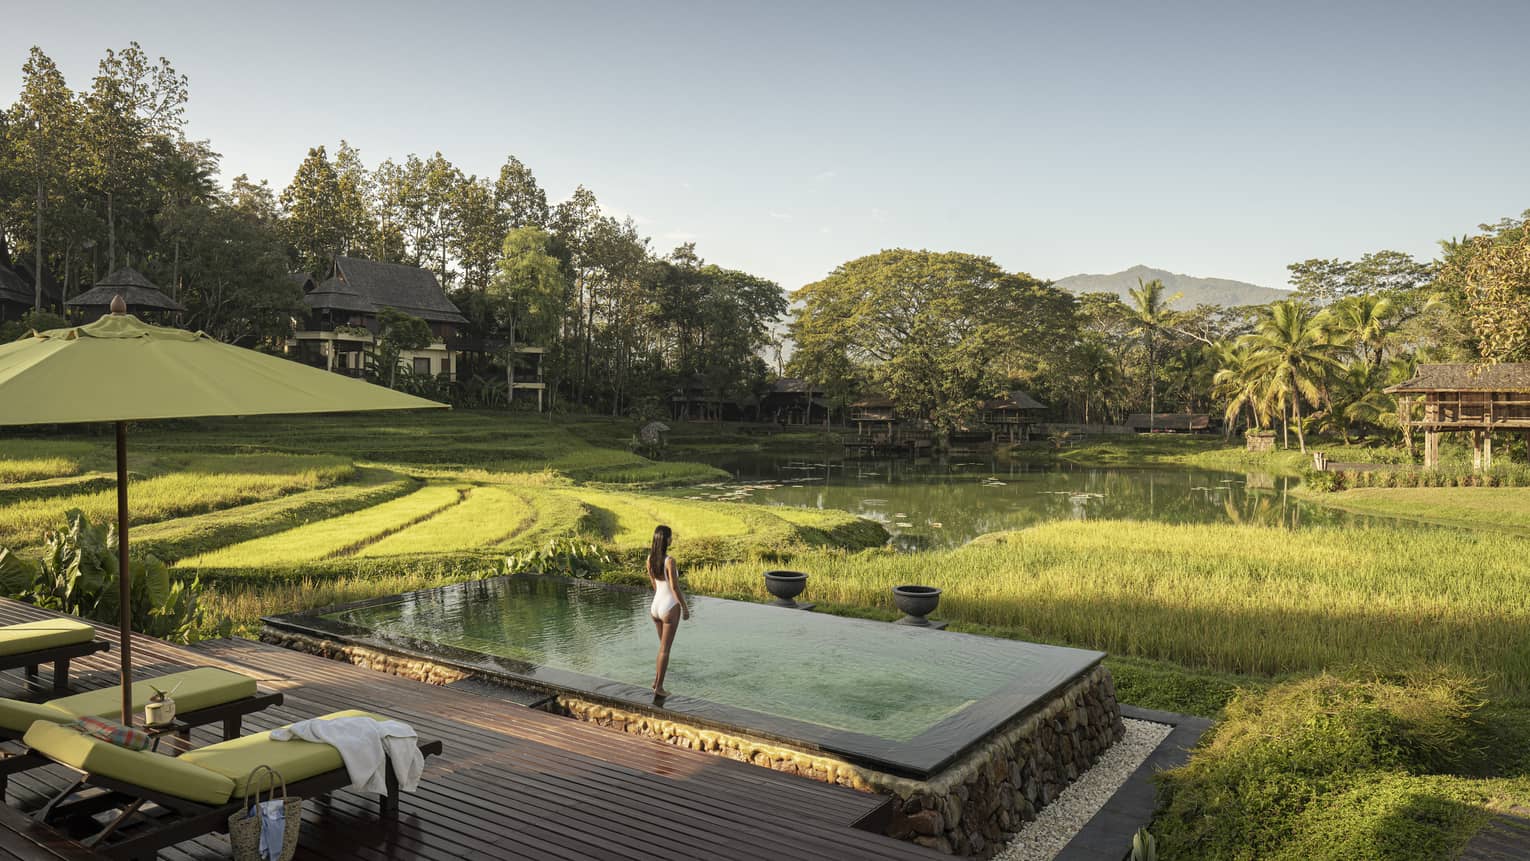 Woman in white bathing suit stands in front of pool overlooking rice paddies